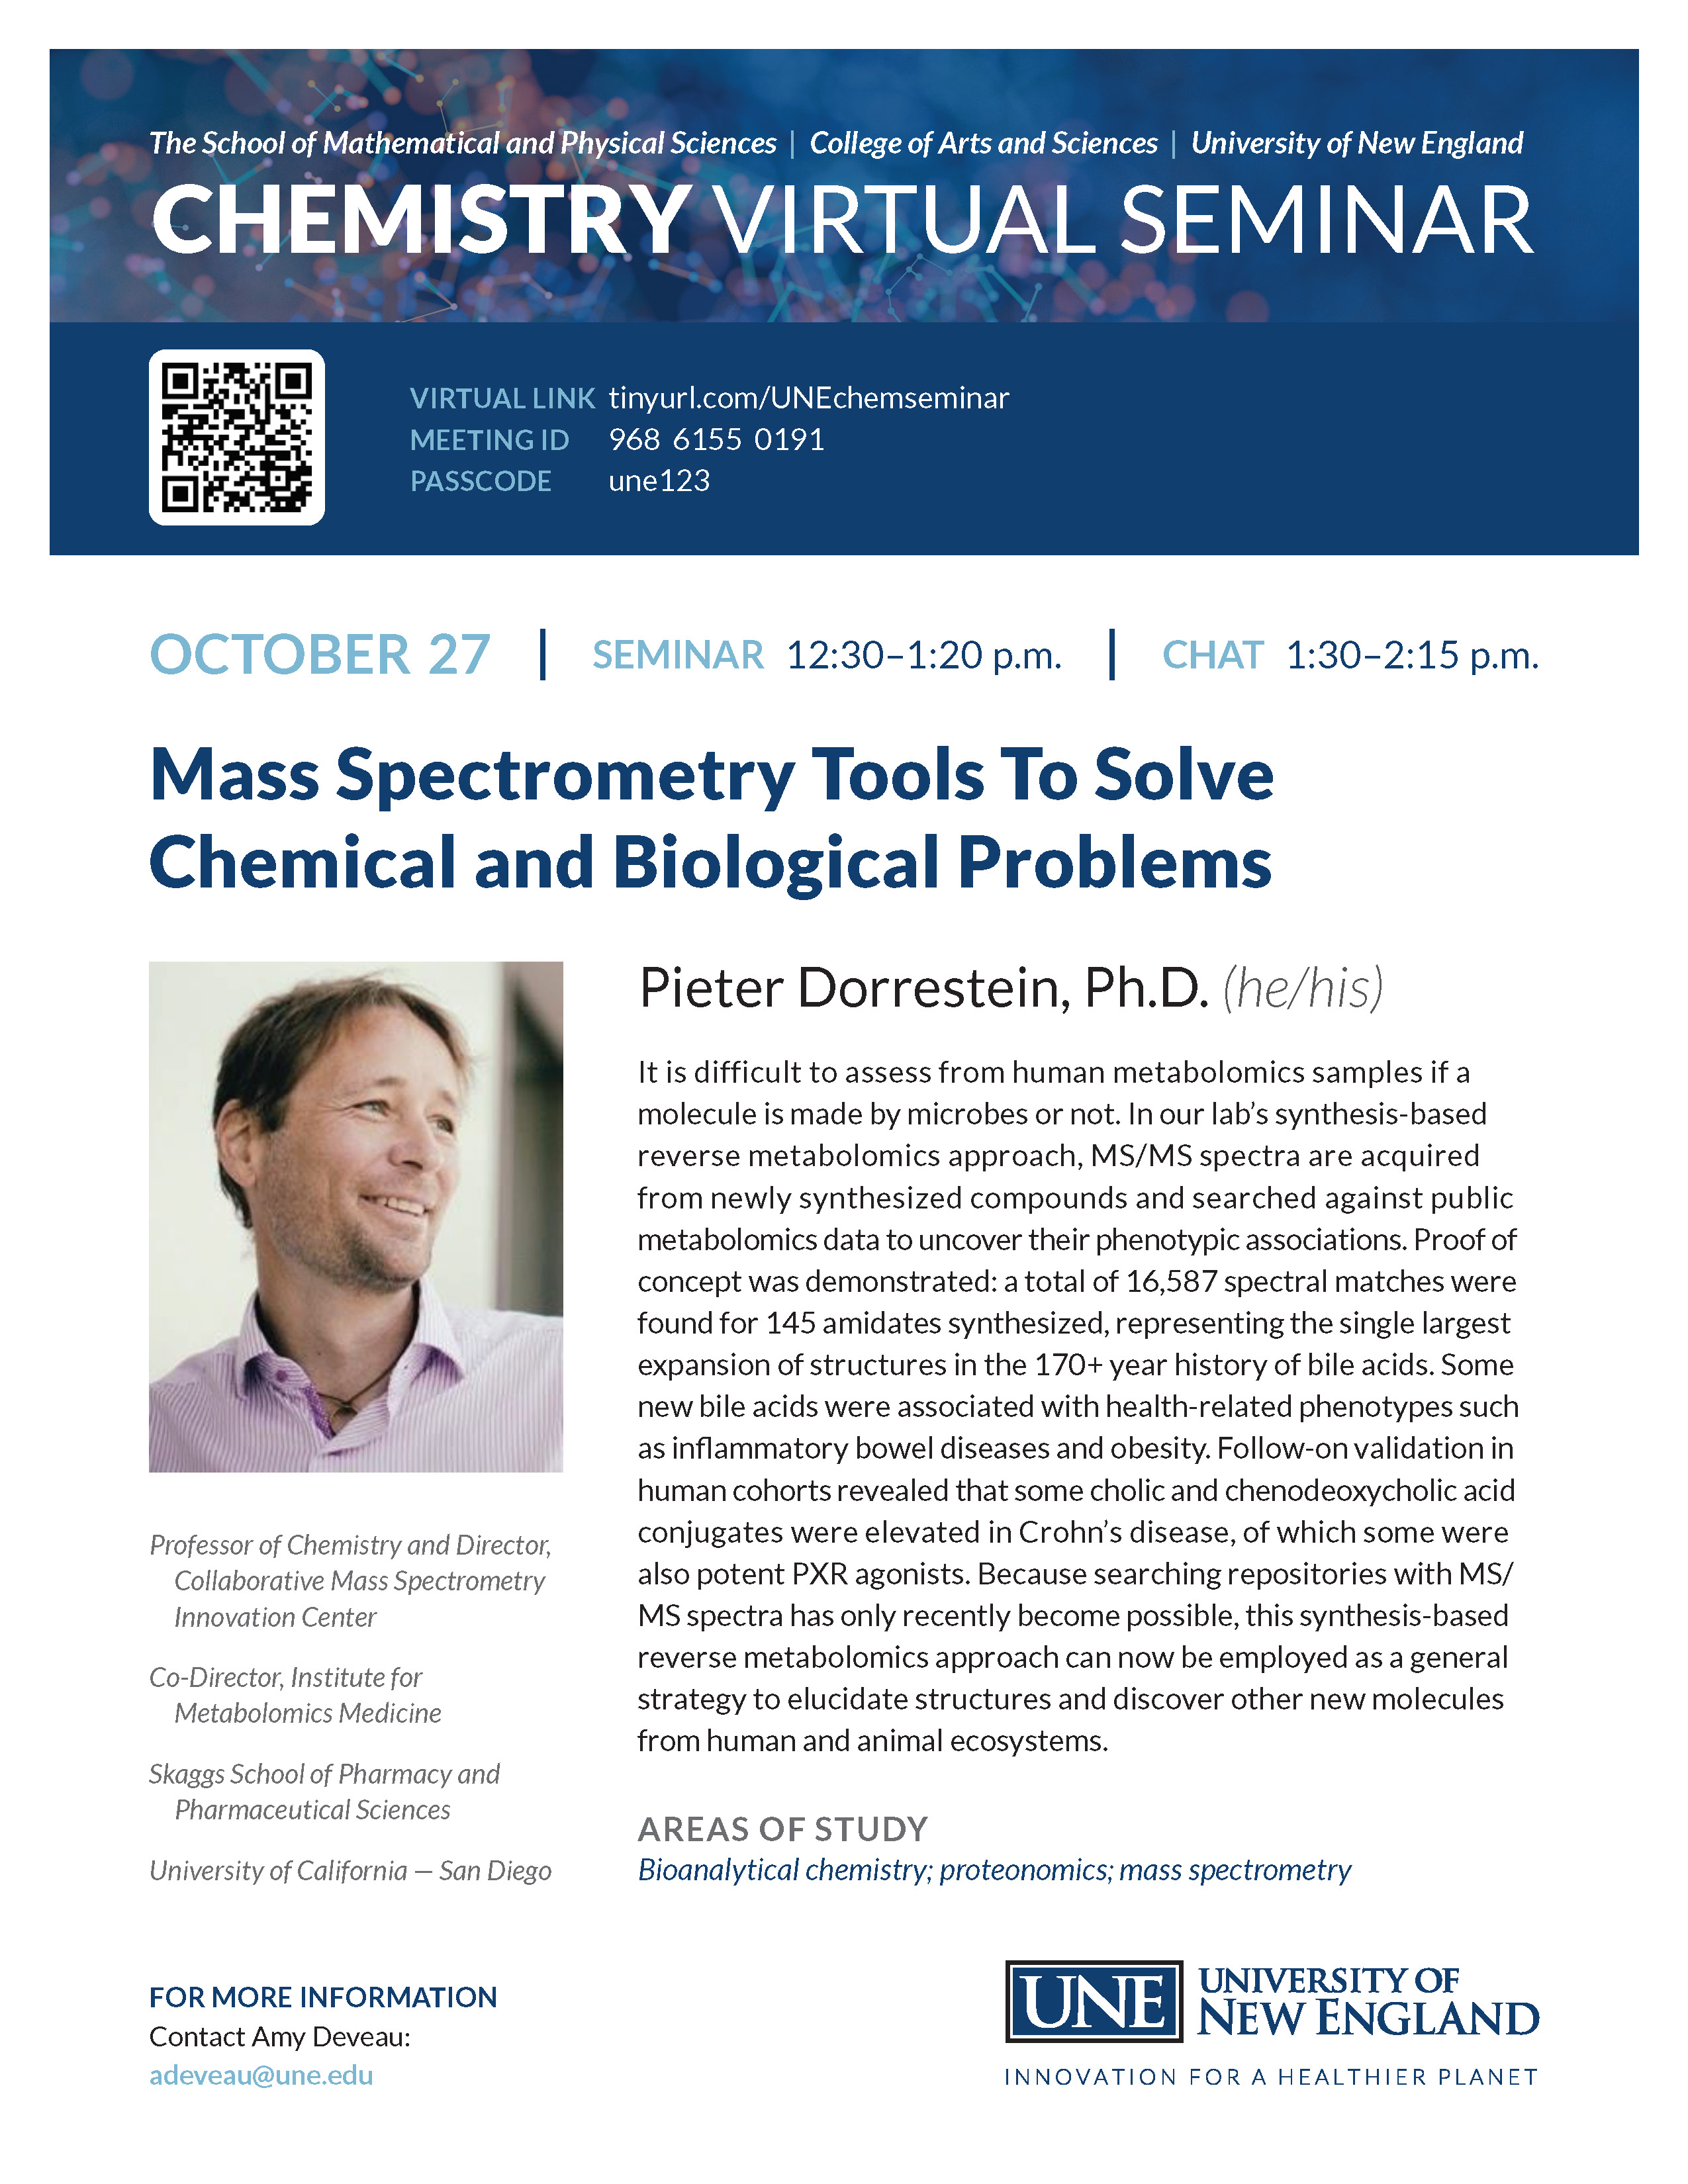 Flyer for Pieter Dorrestein, Ph.D., presents Mass Spectrometry Tools to Solve Chemical and Biological Problems event